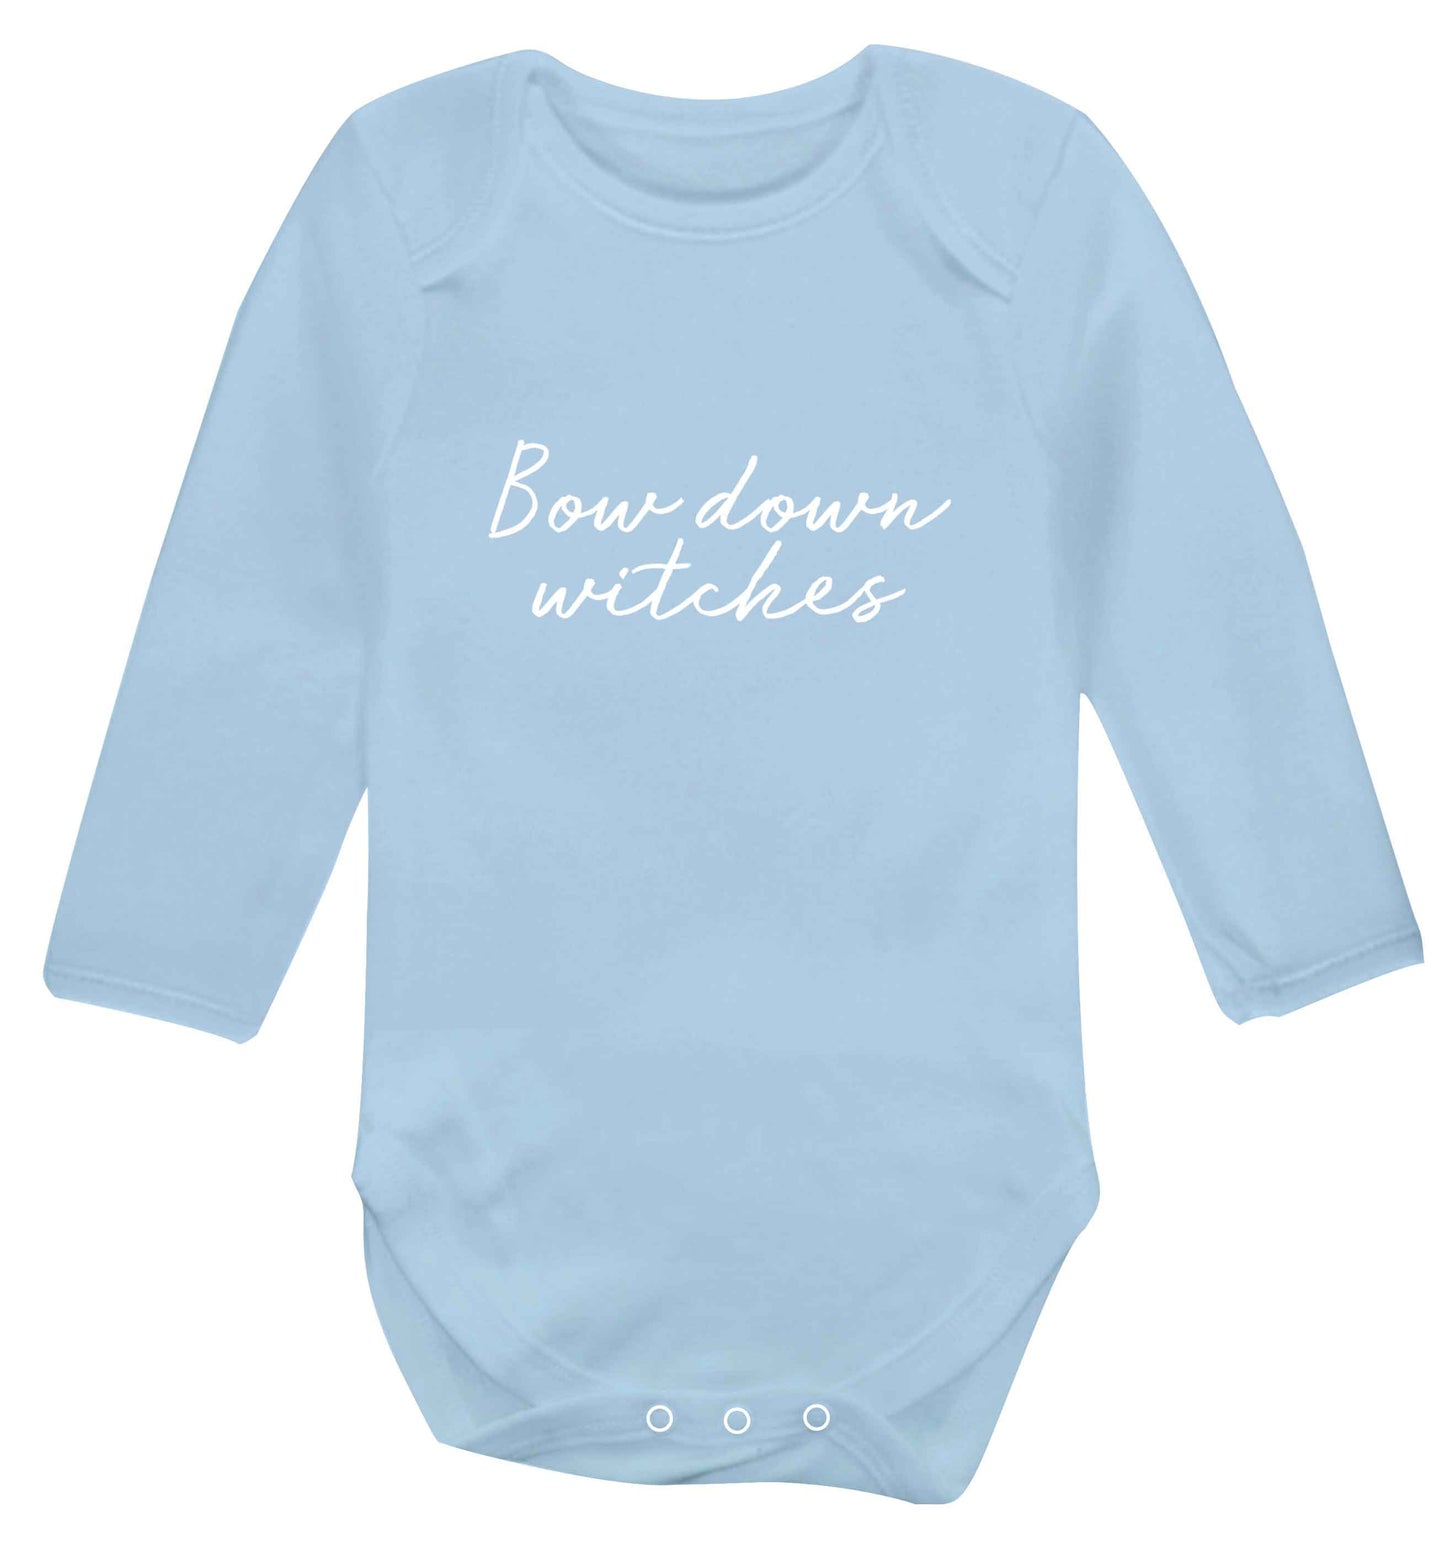 Bow down witches baby vest long sleeved pale blue 6-12 months